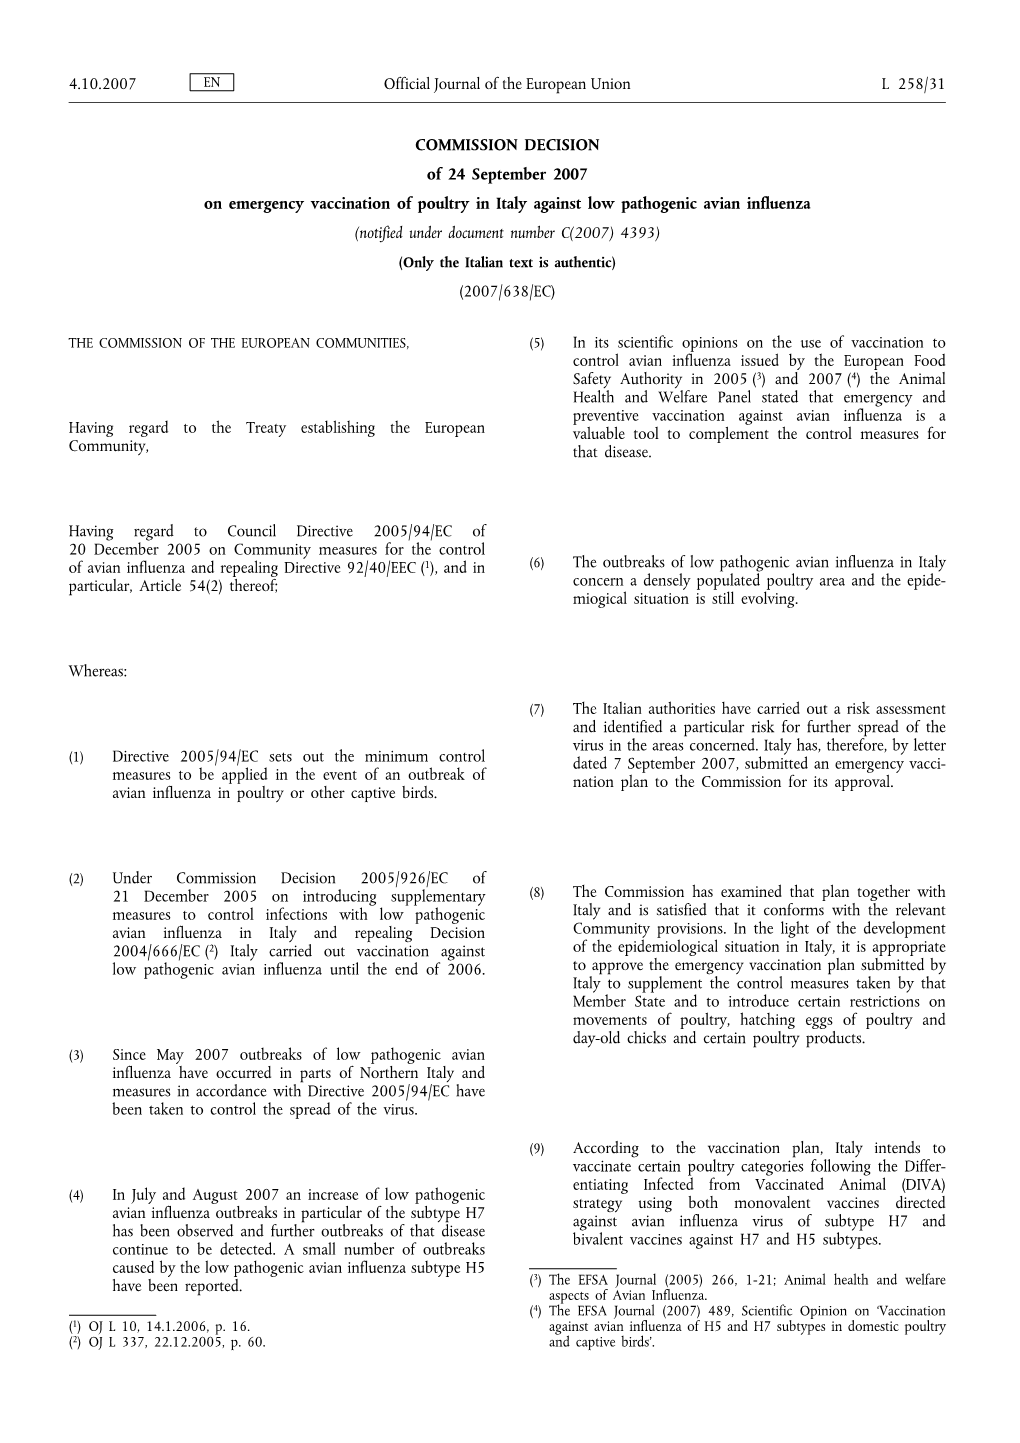 COMMISSION DECISION of 24 September 2007 On